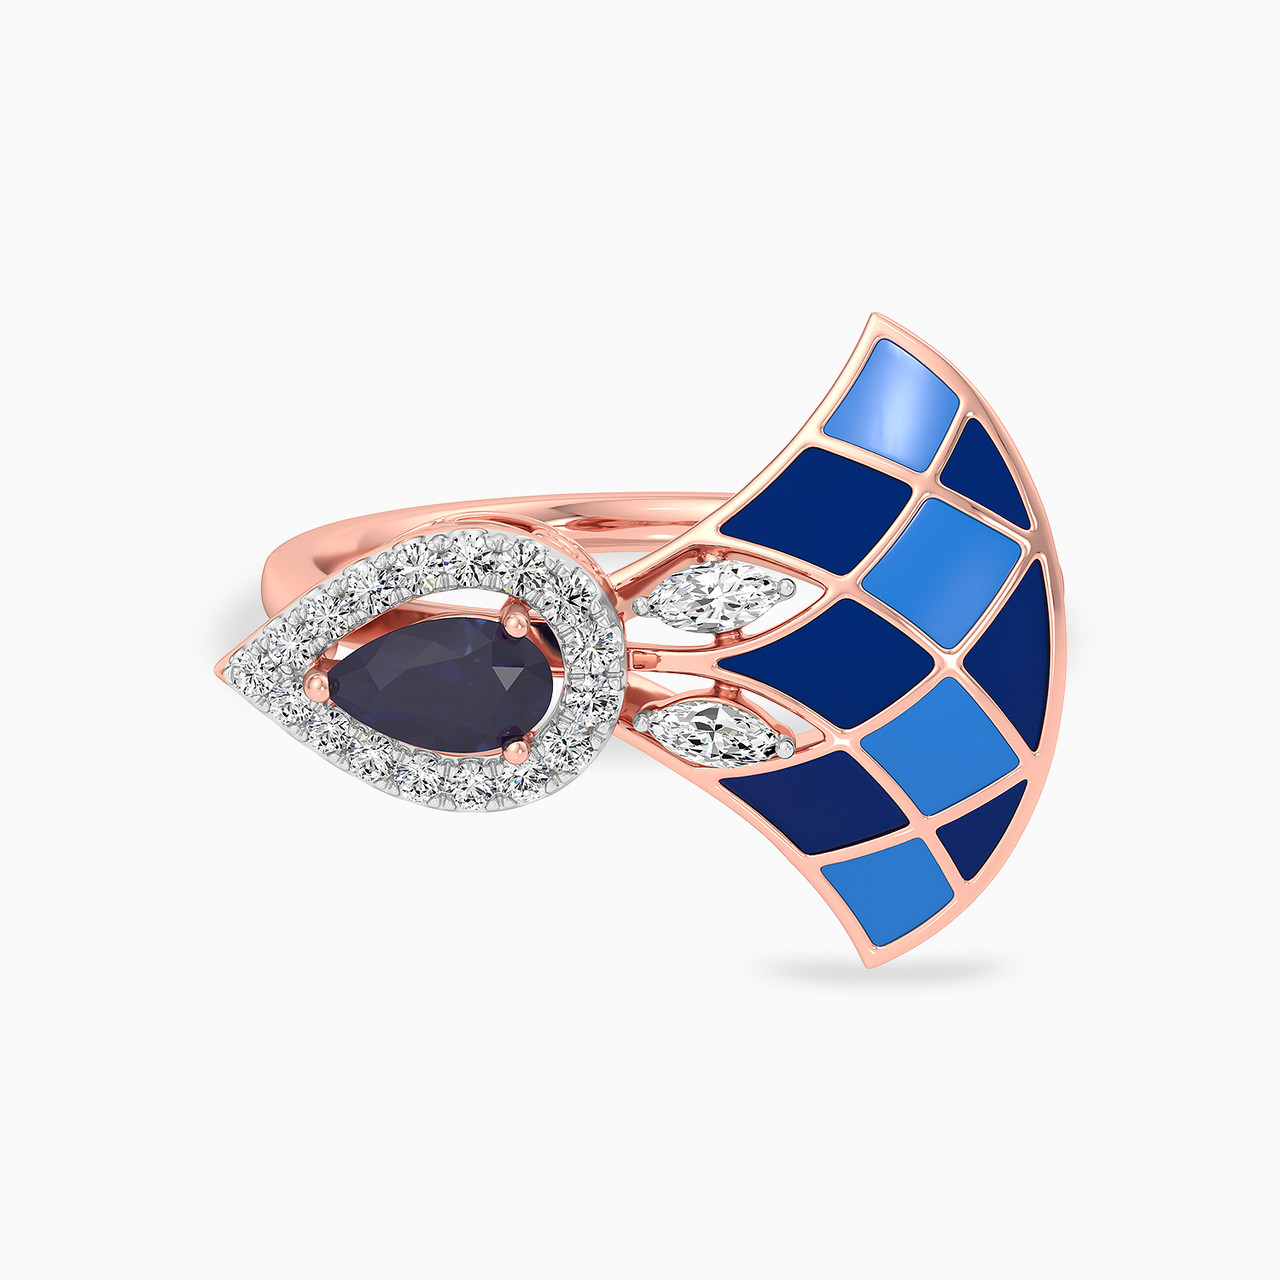 Multi-shaped Diamond & Enamel Coated with Colored Stones Statement Ring in 18K Gold